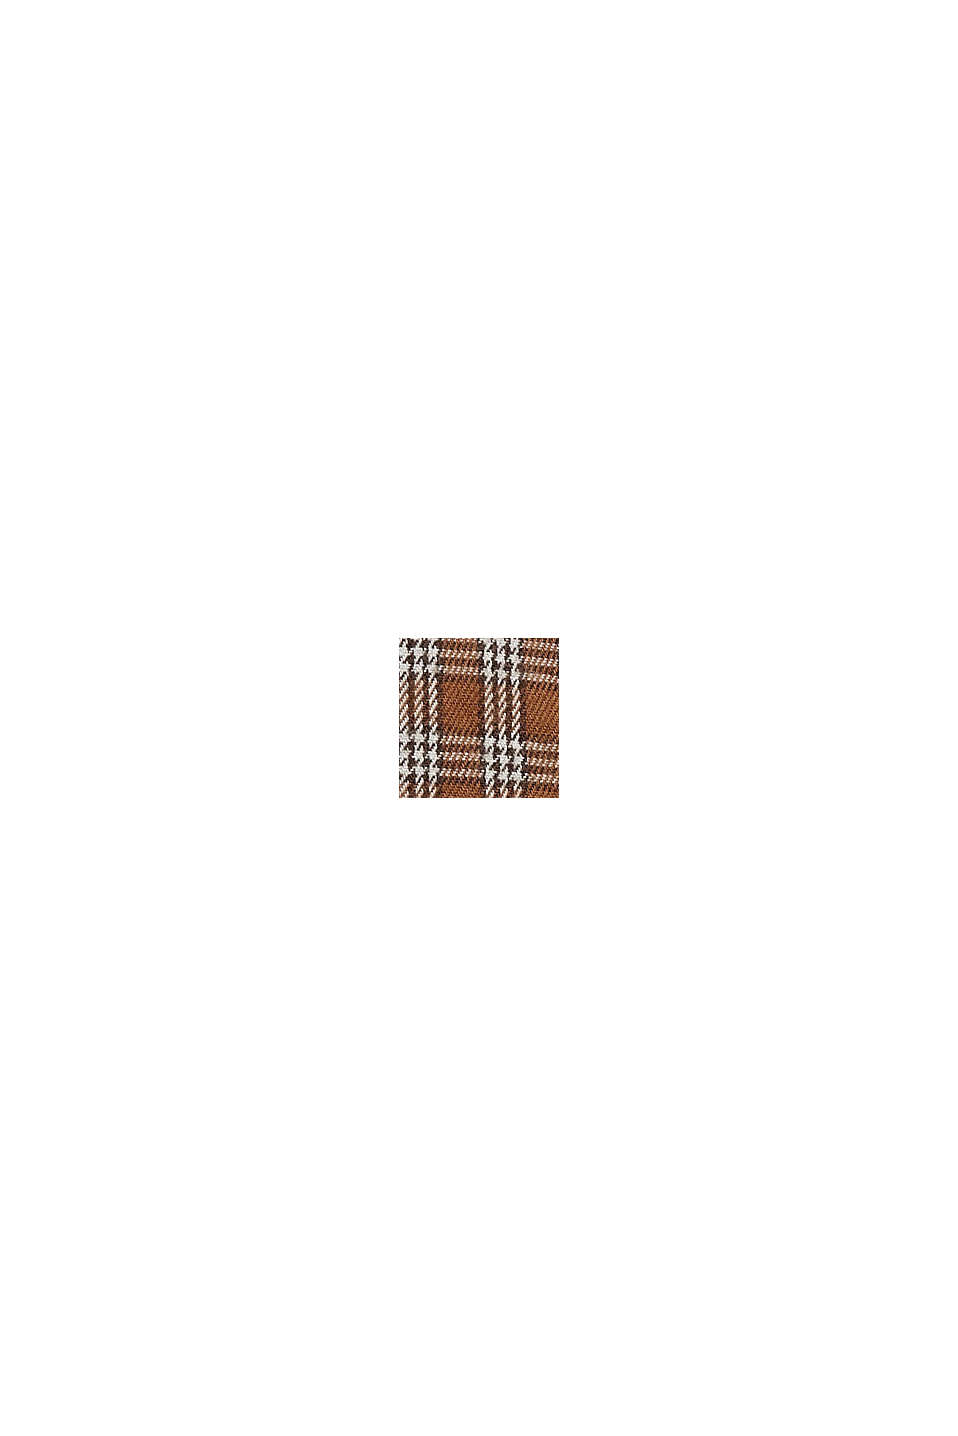 Flannel shirt with check pattern, organic cotton, CAMEL, swatch